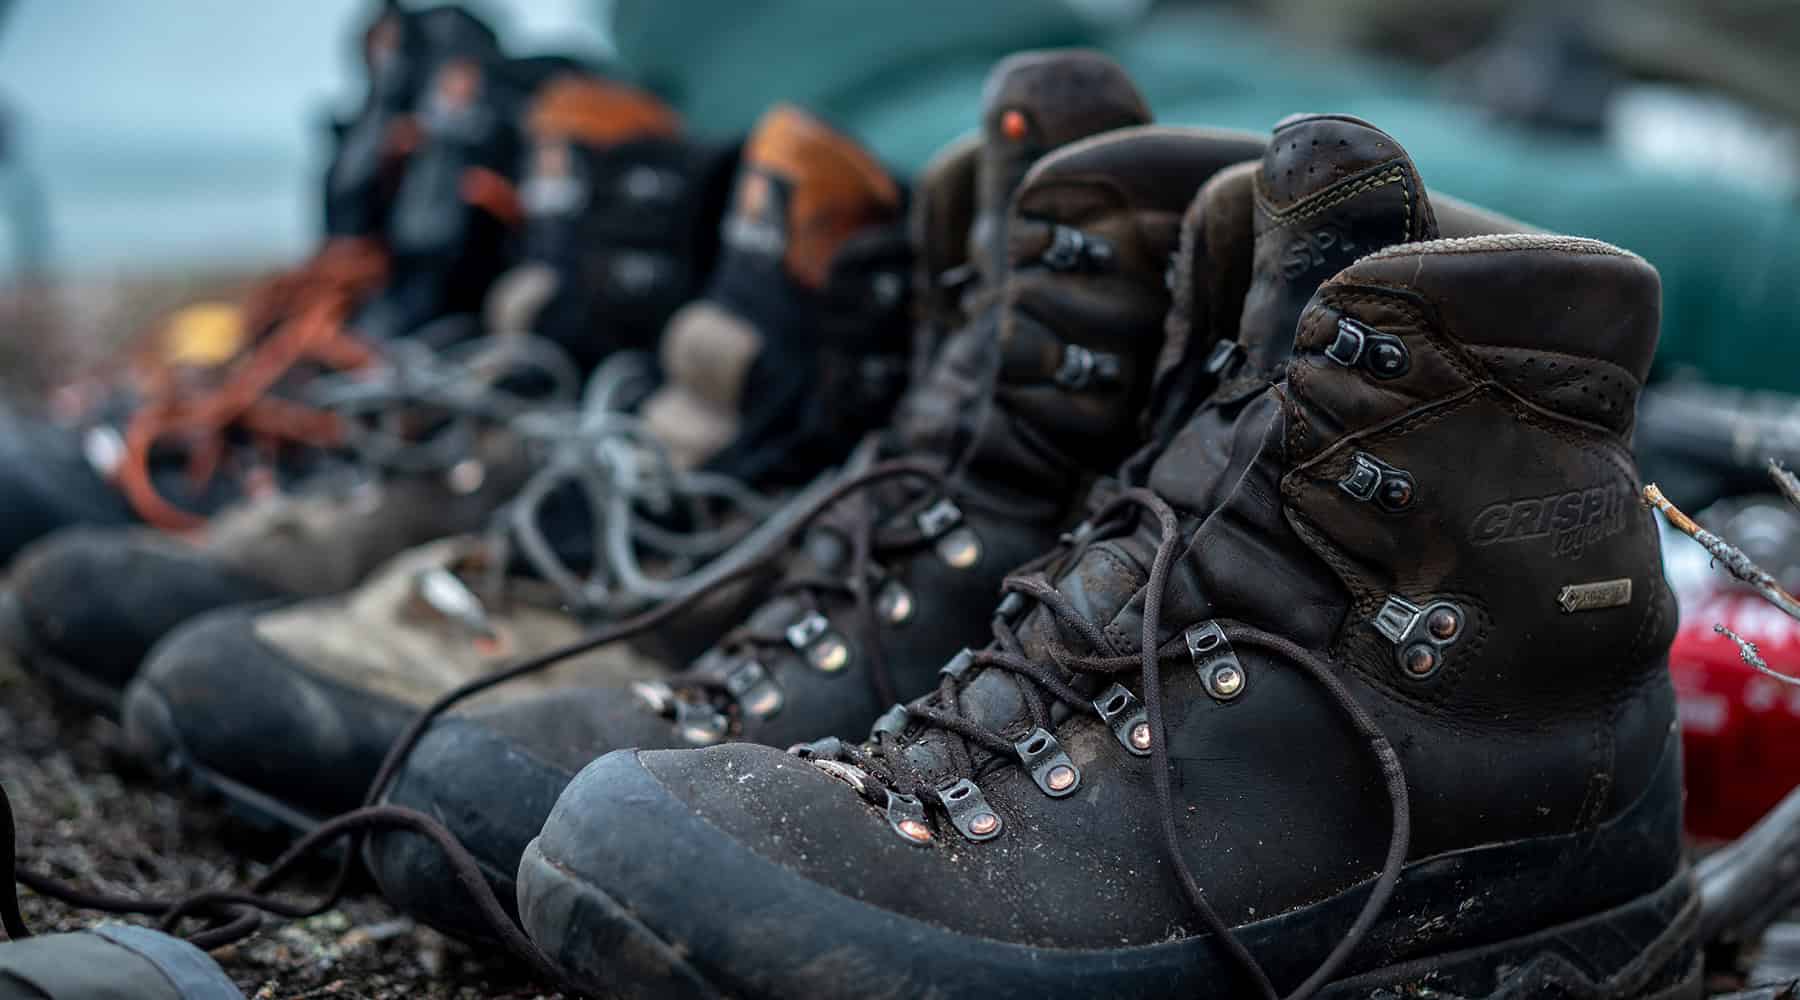 CRISPI Boots on Sale in 2024 for hiking, hunting and climbing fourteeners